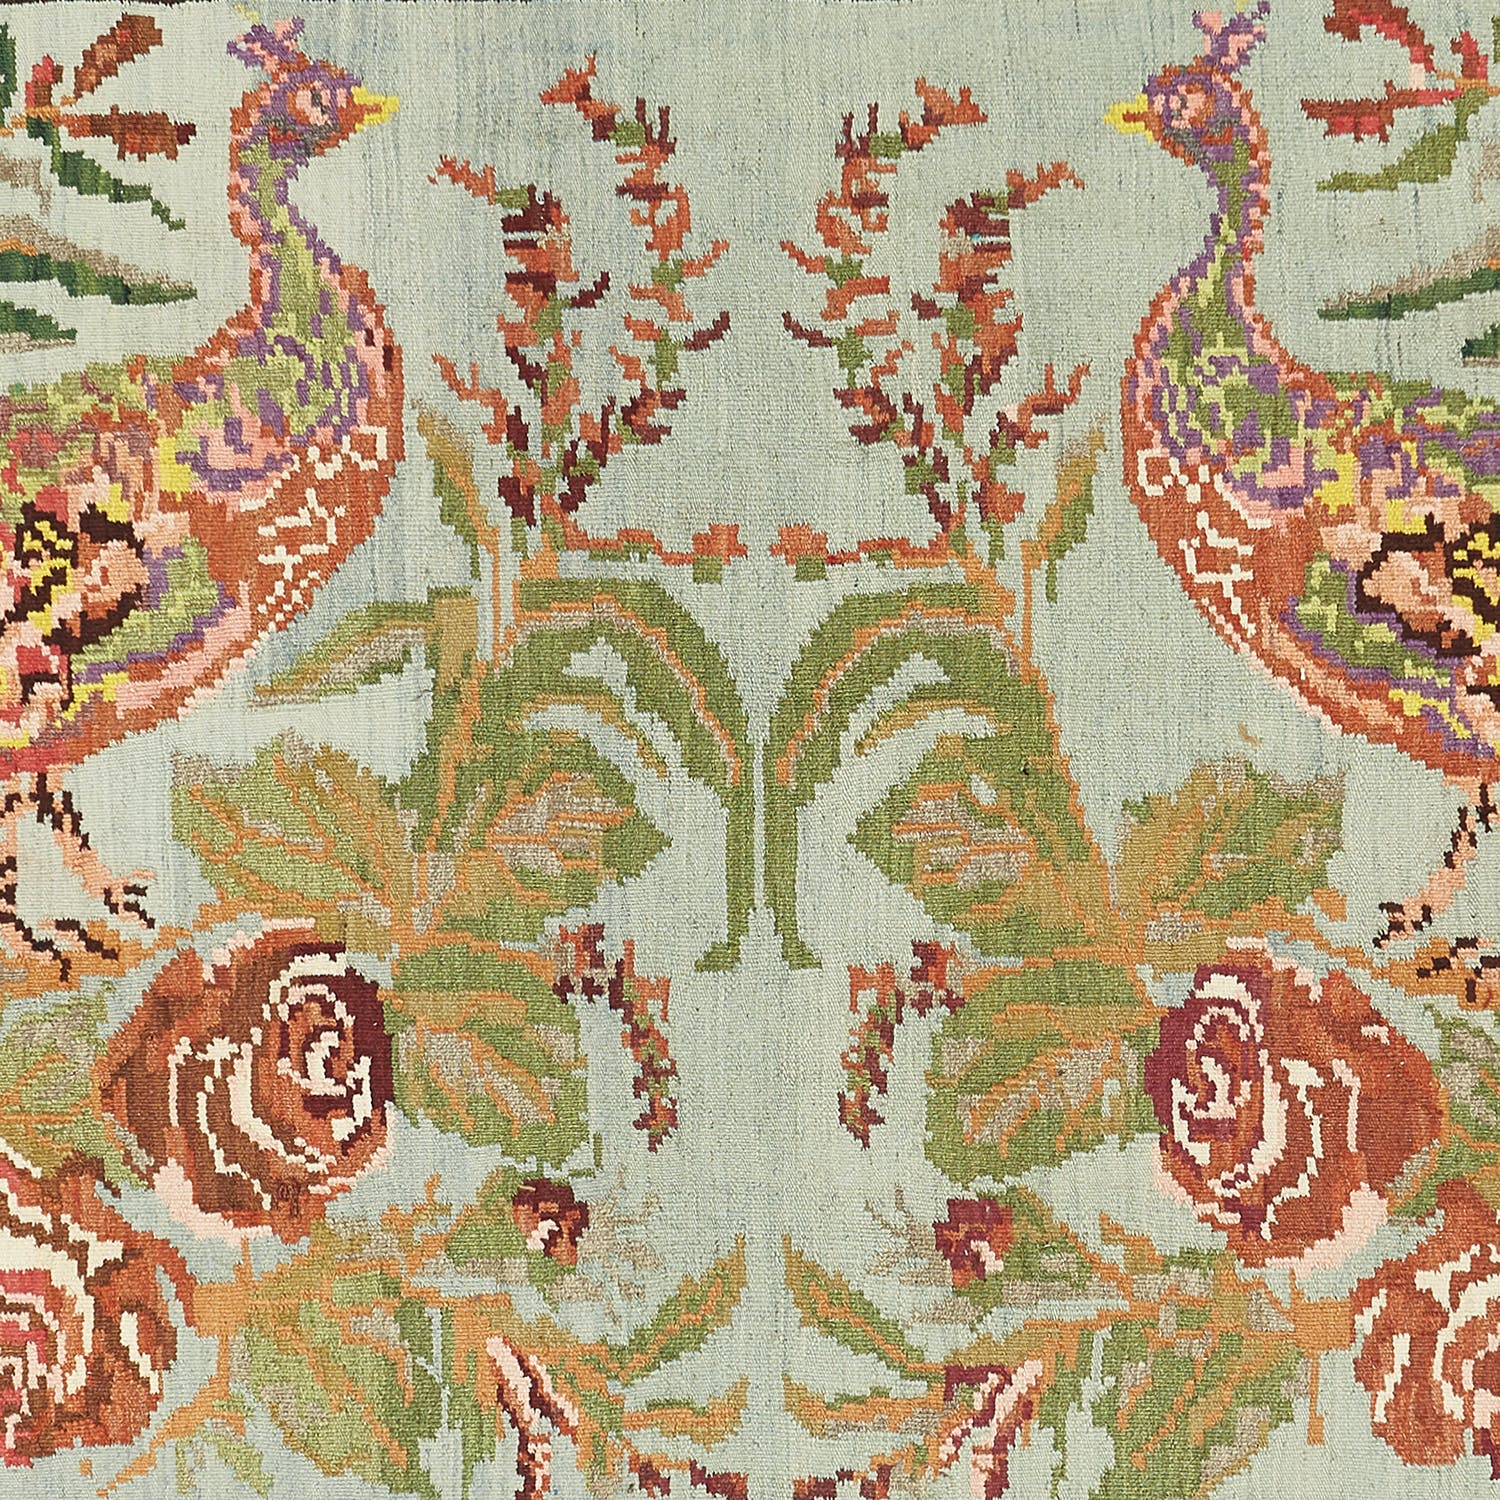 Intricate textile design showcasing stylized birds and floral motifs.